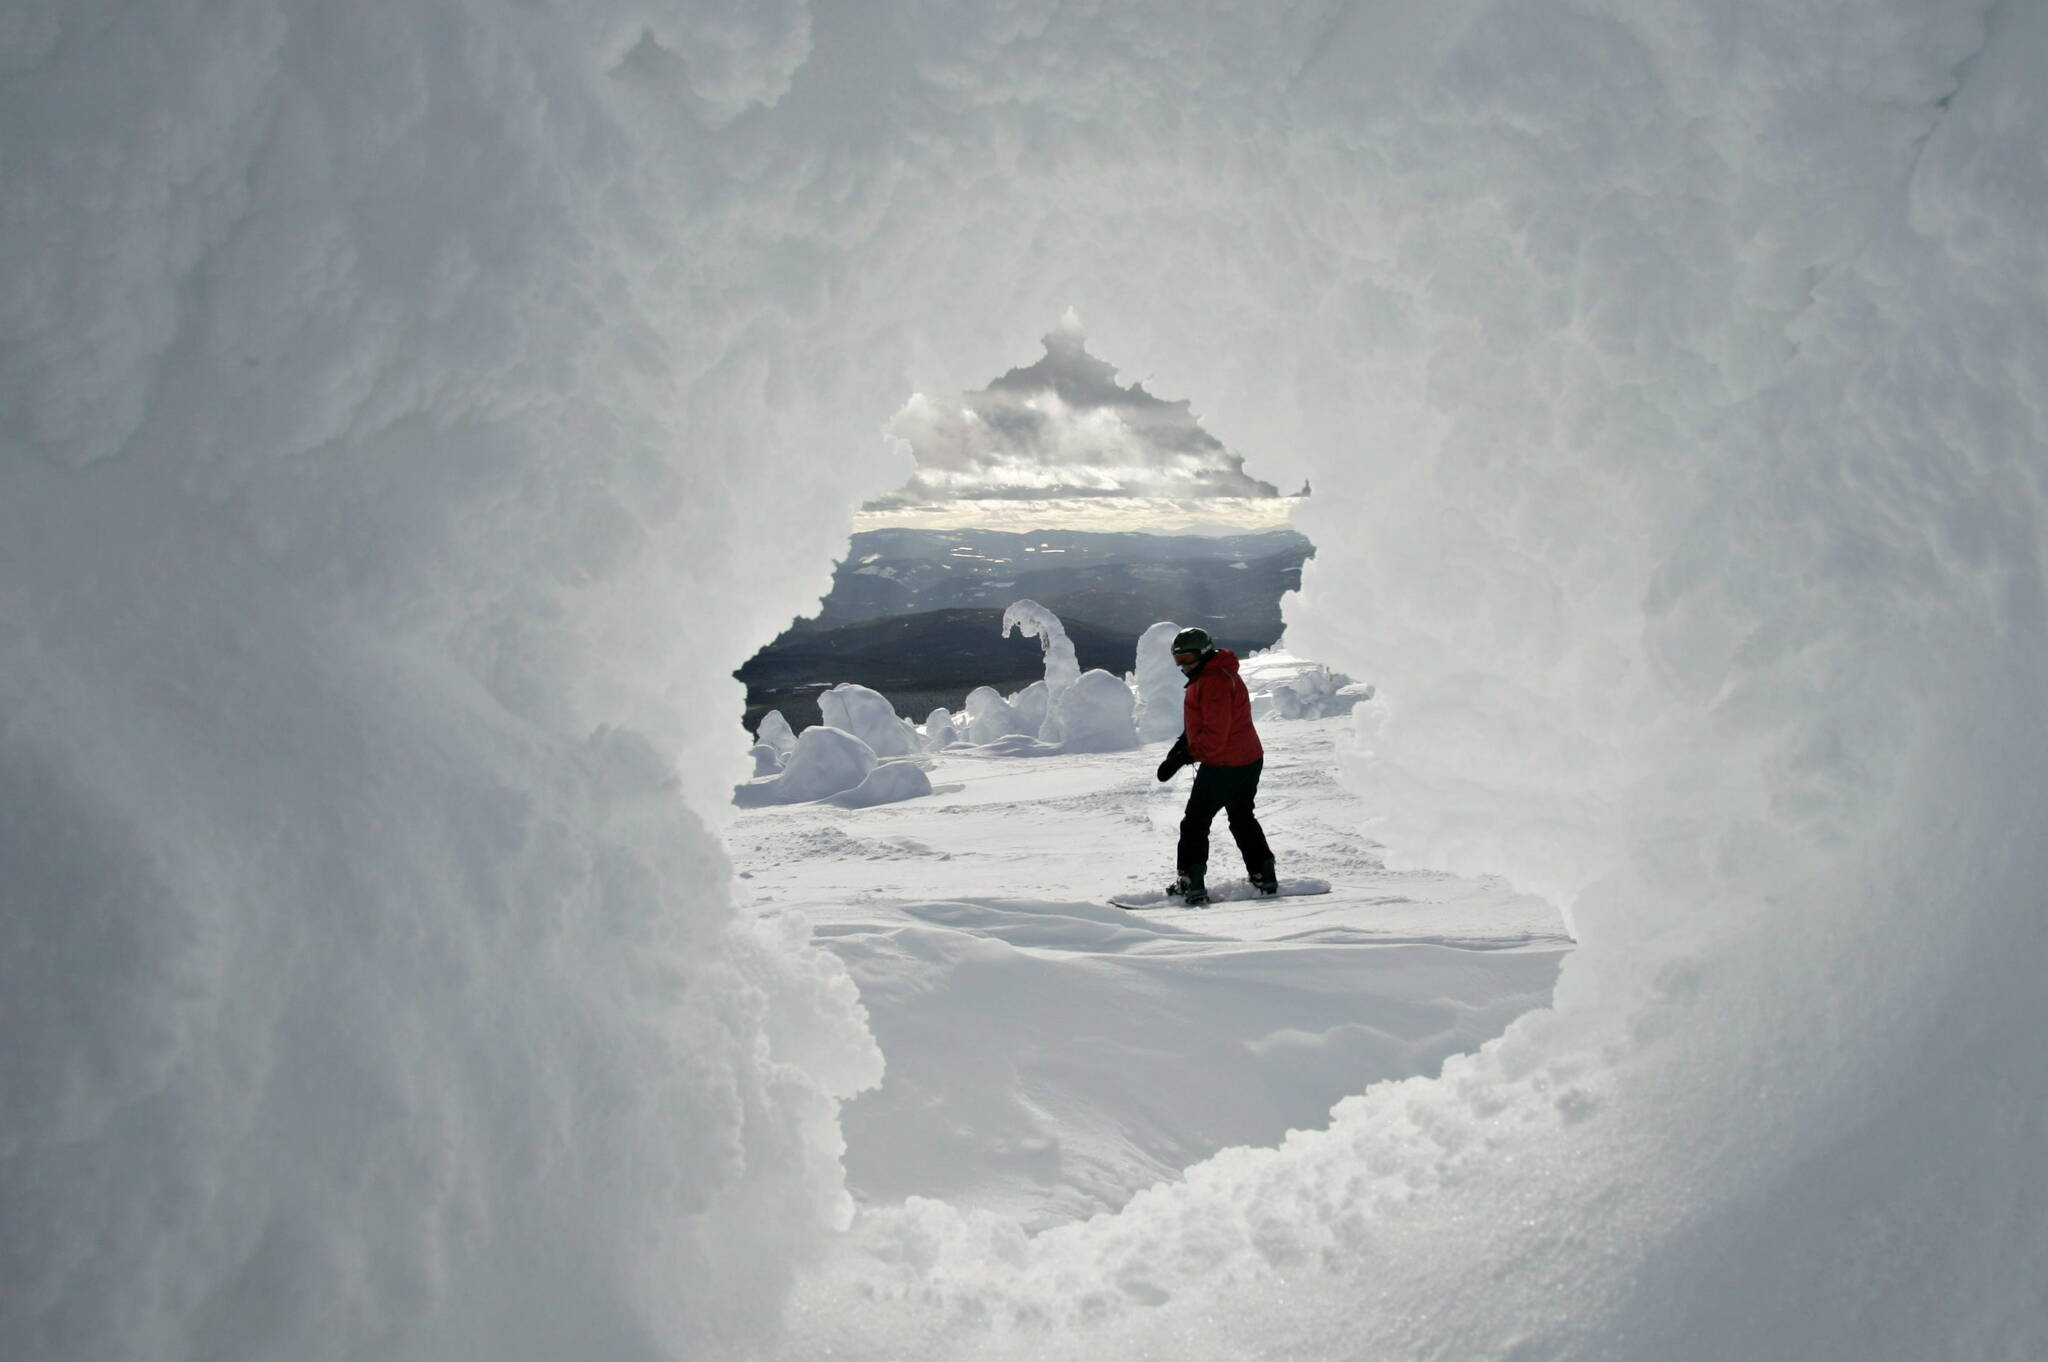 A snowboarder is seen through a so-called snow Ghots at the top of Big White ski resort Thursday, Feb. 2, 2006 near Kelowna, B.C. THE CANADIAN PRESS/Jacques Boissinot